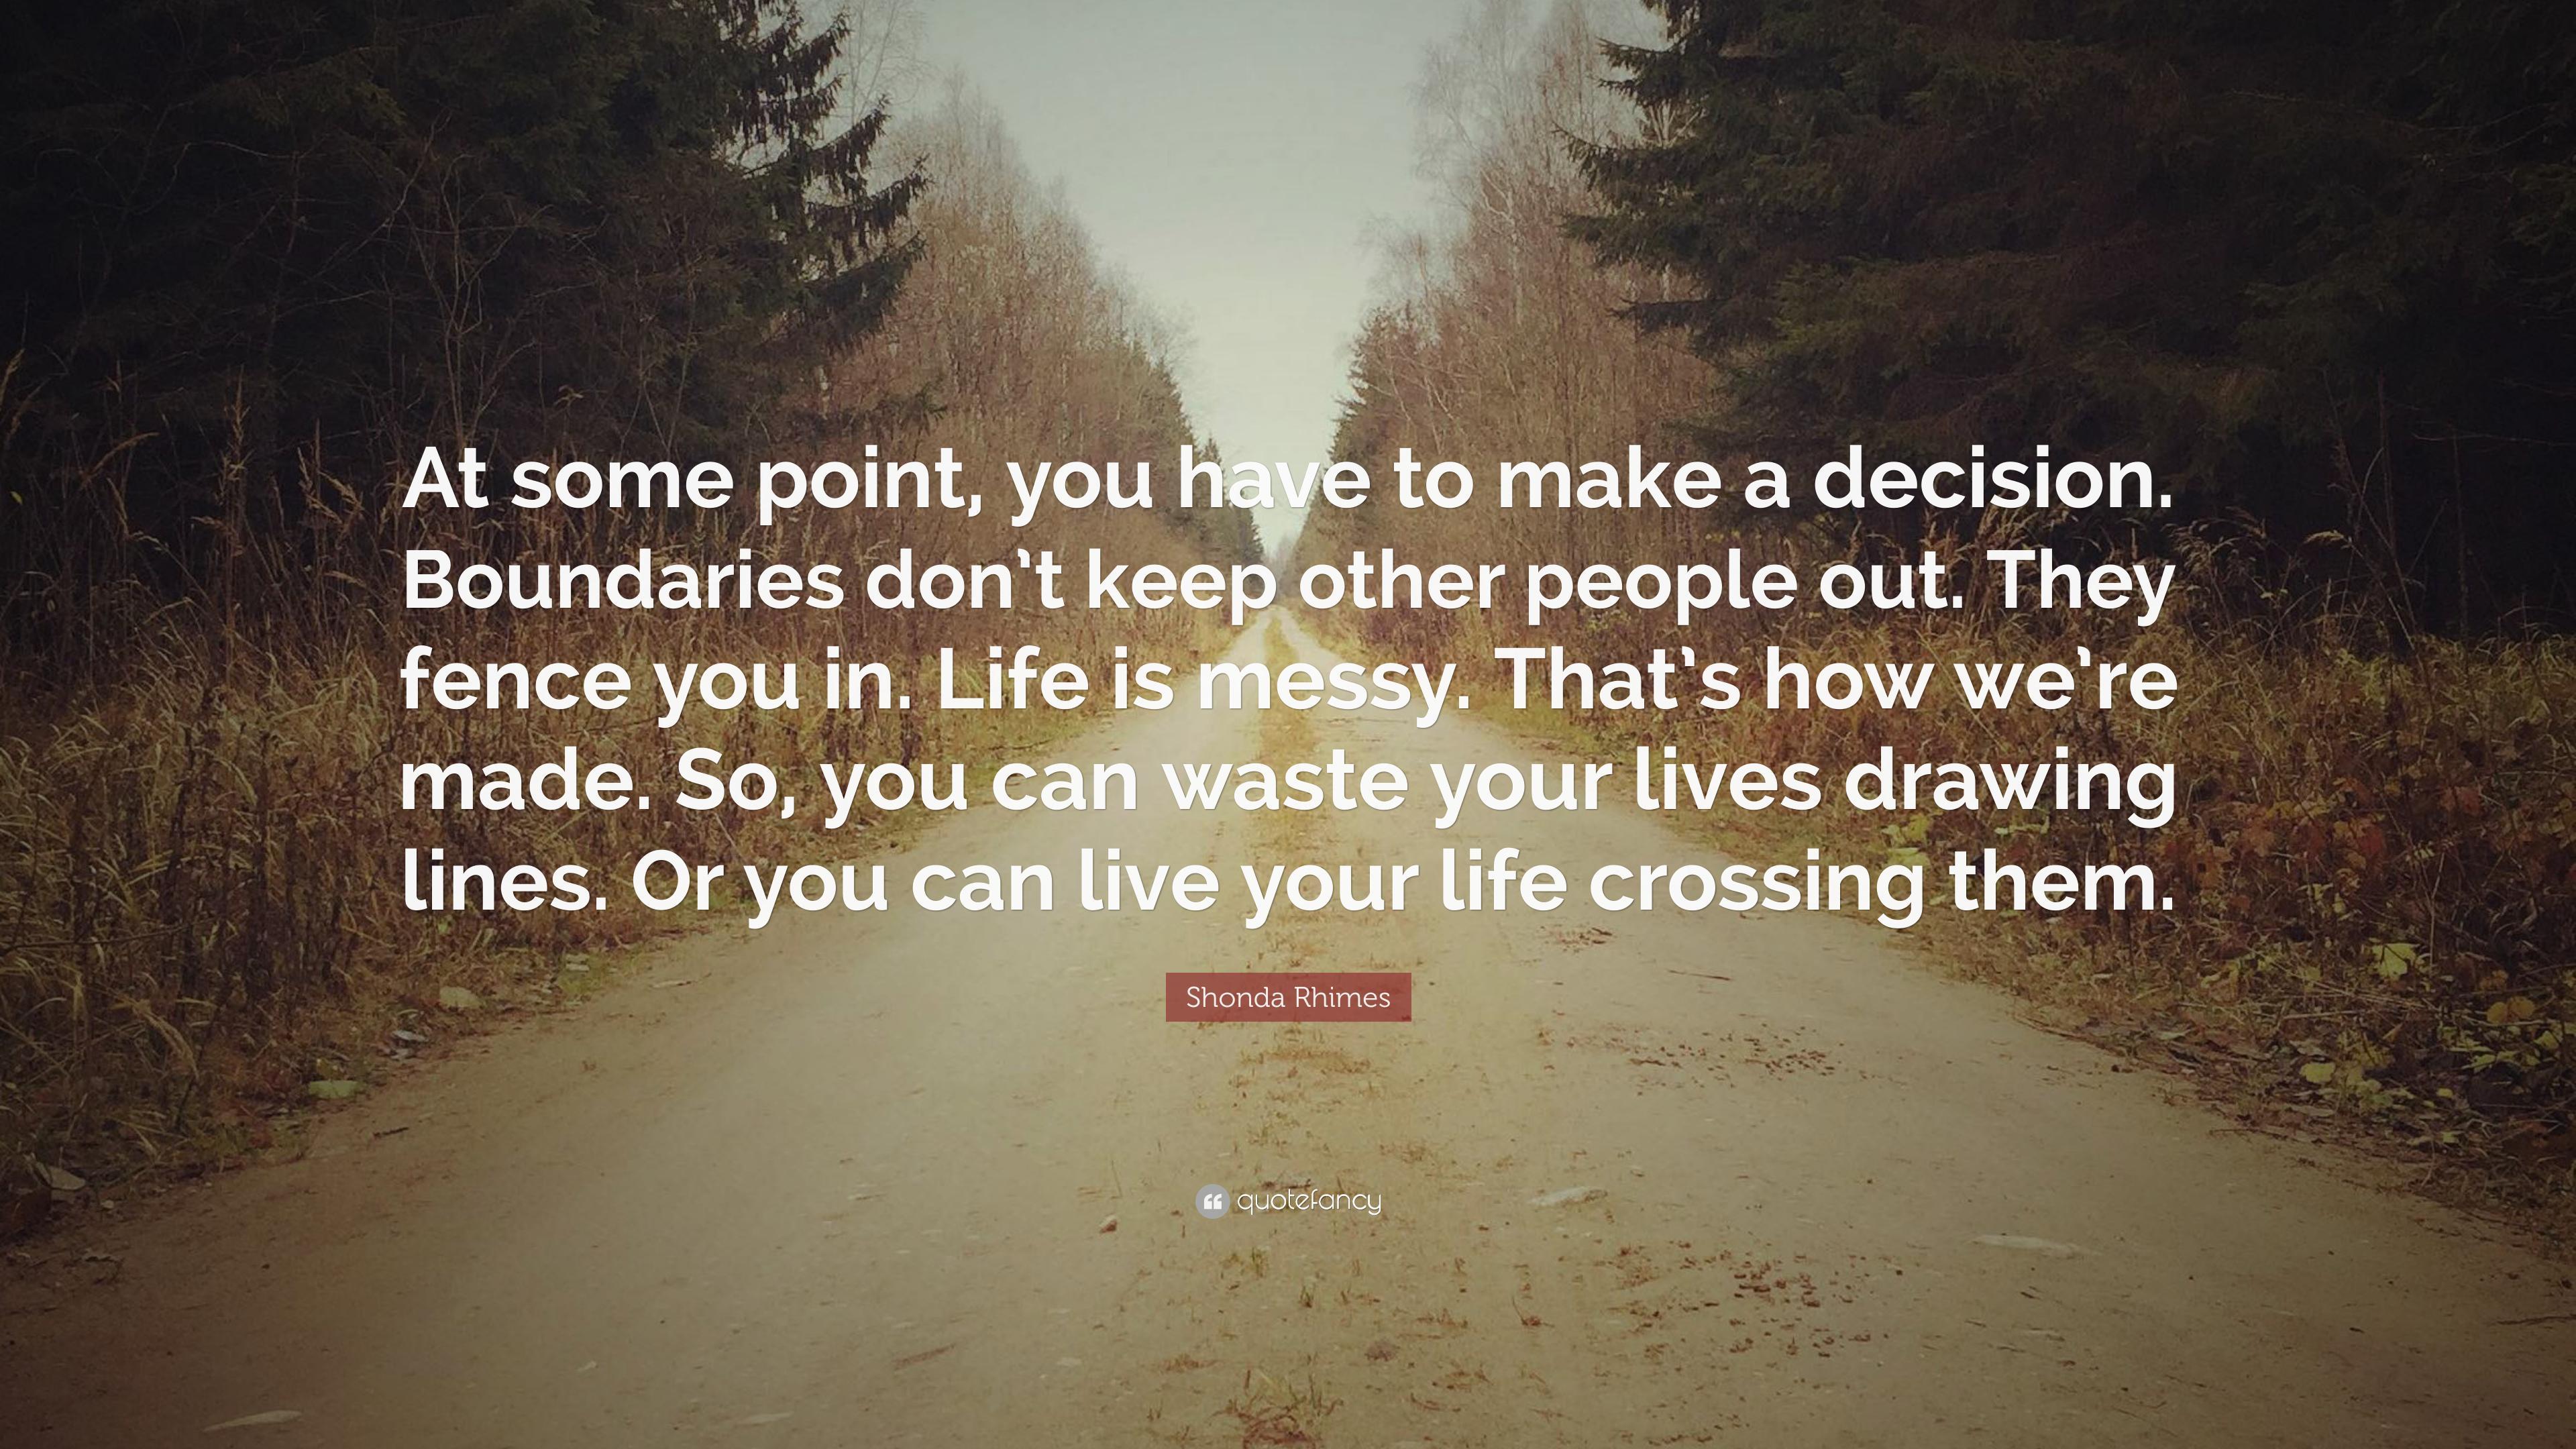 Shonda Rhimes Quote: “At some point, you have to make a decision